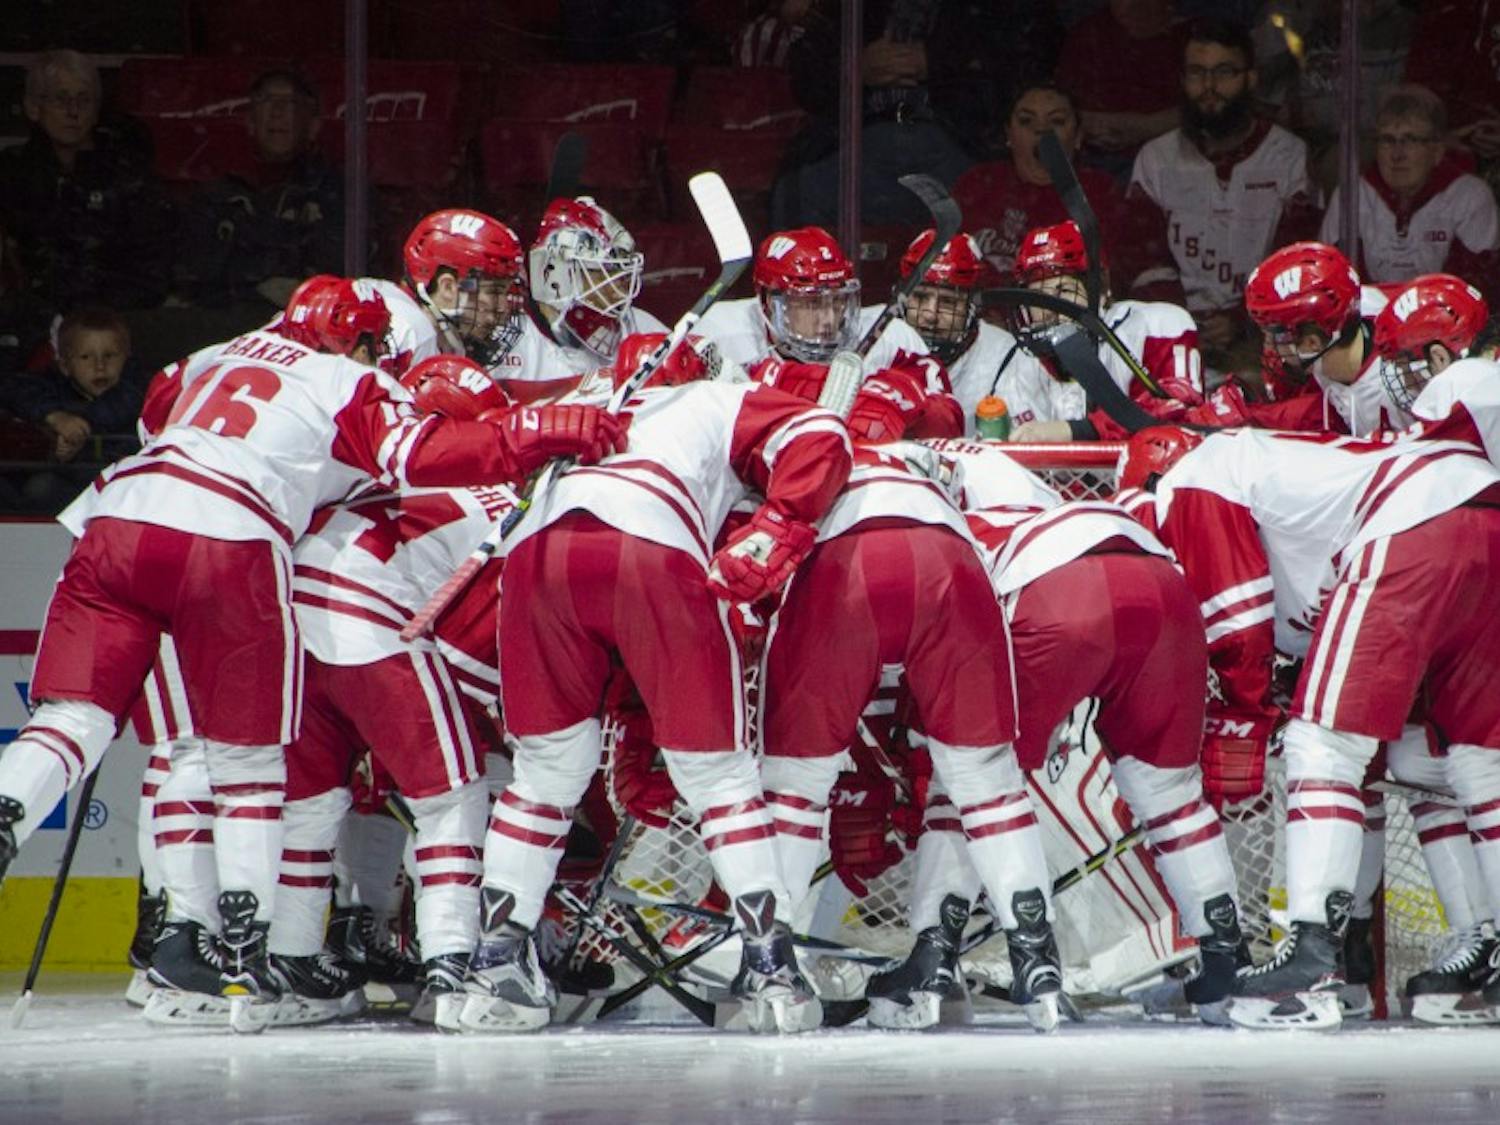 Since arriving at Wisconsin, Granato has been implementing confidence within his players and the program. Despite its underwhelming record this season, Wisconsin looks to continue progressing through that confidence.